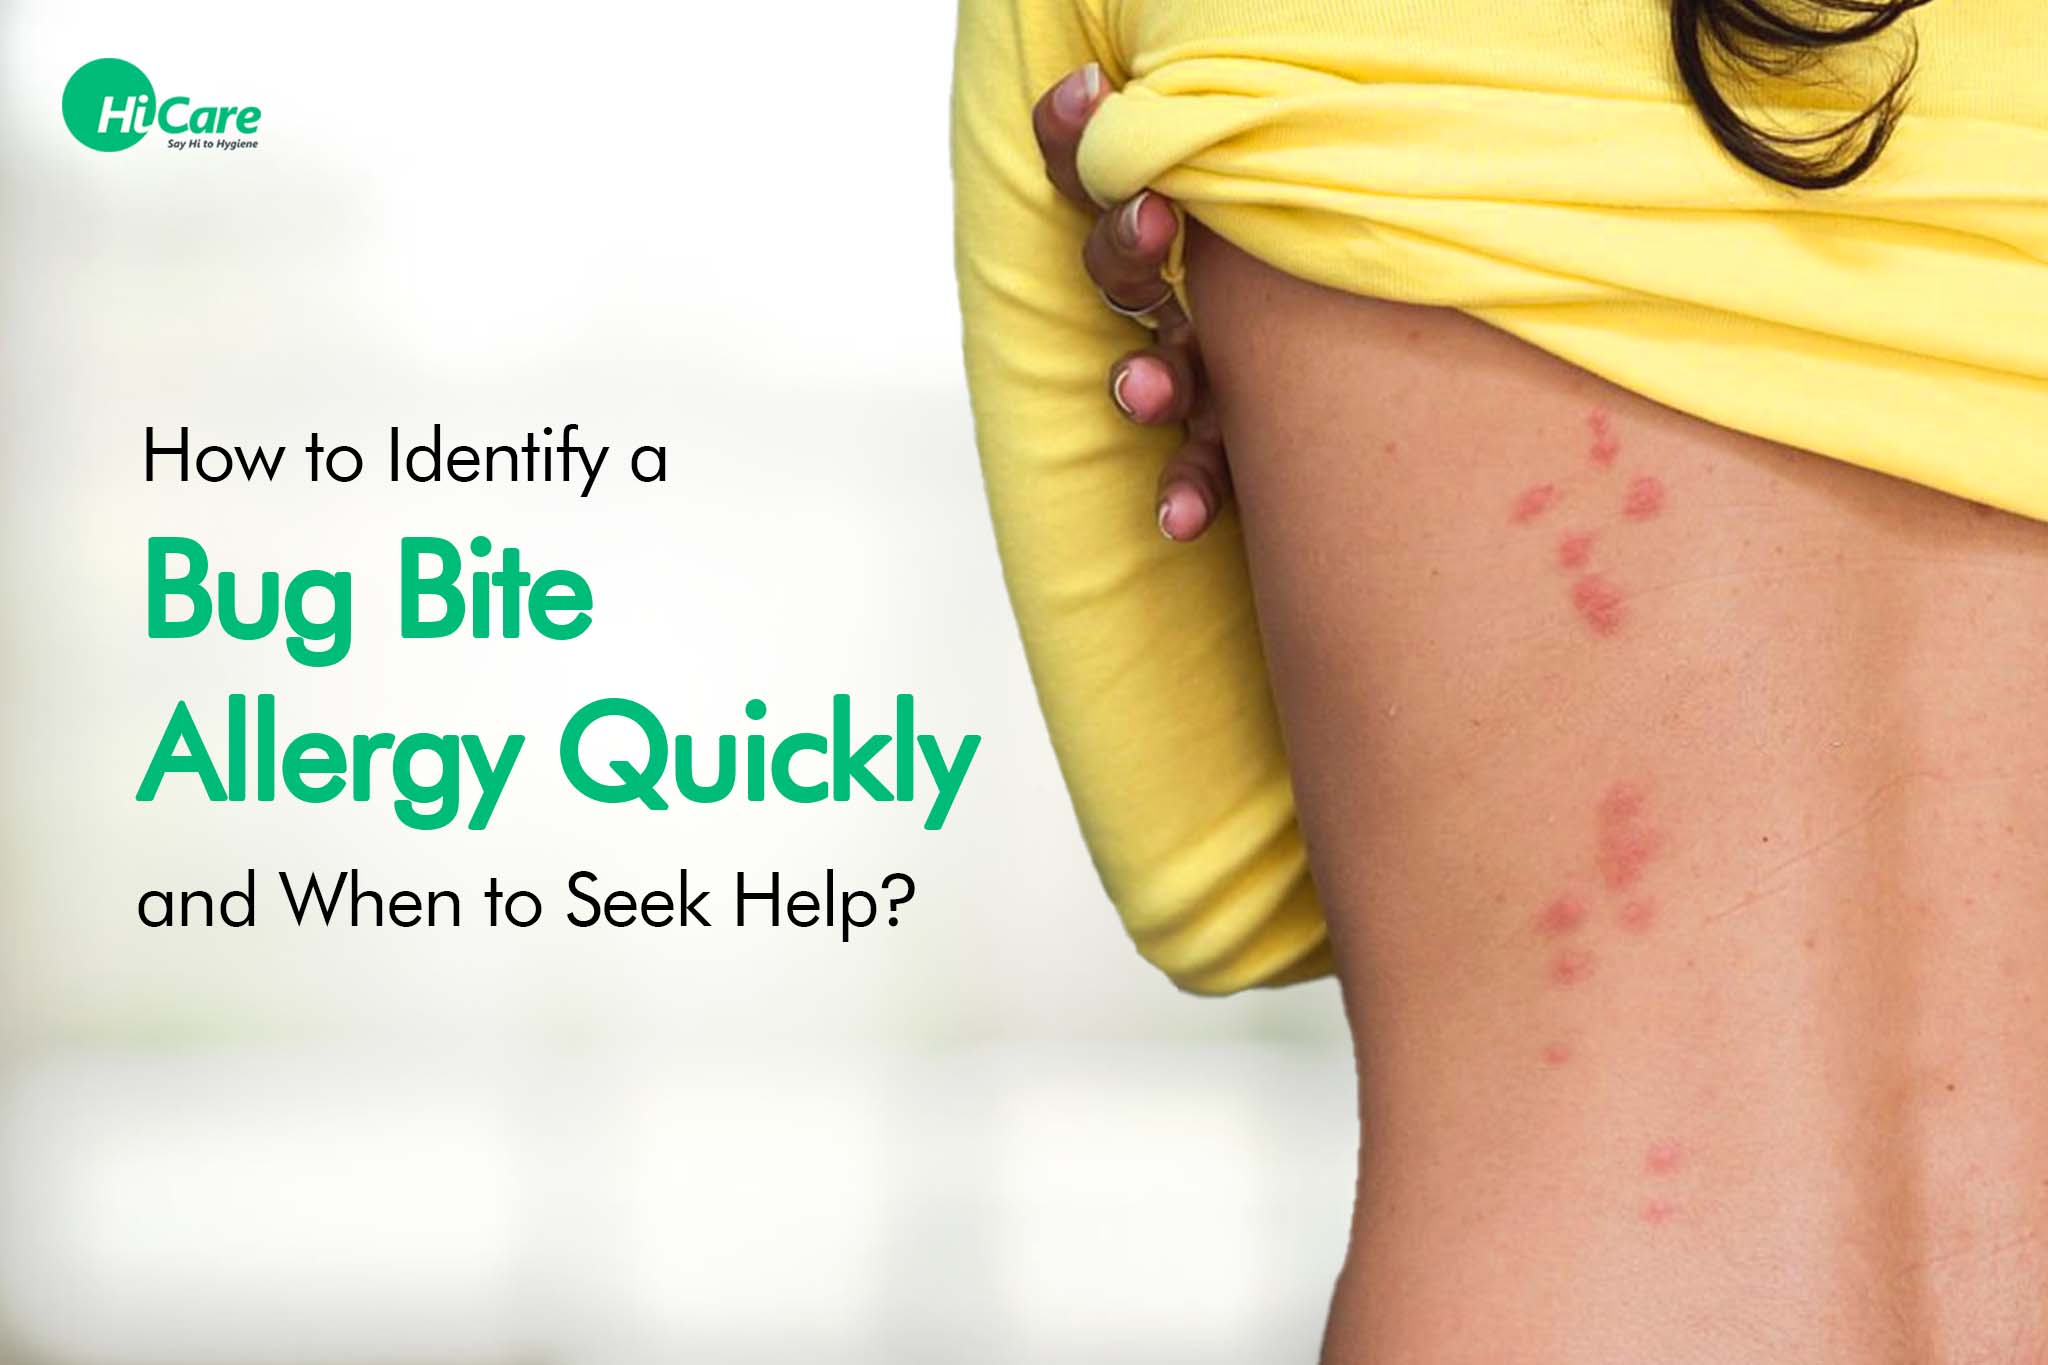 How to Identify a Bug Bite Allergy Quickly and When to Seek Help?